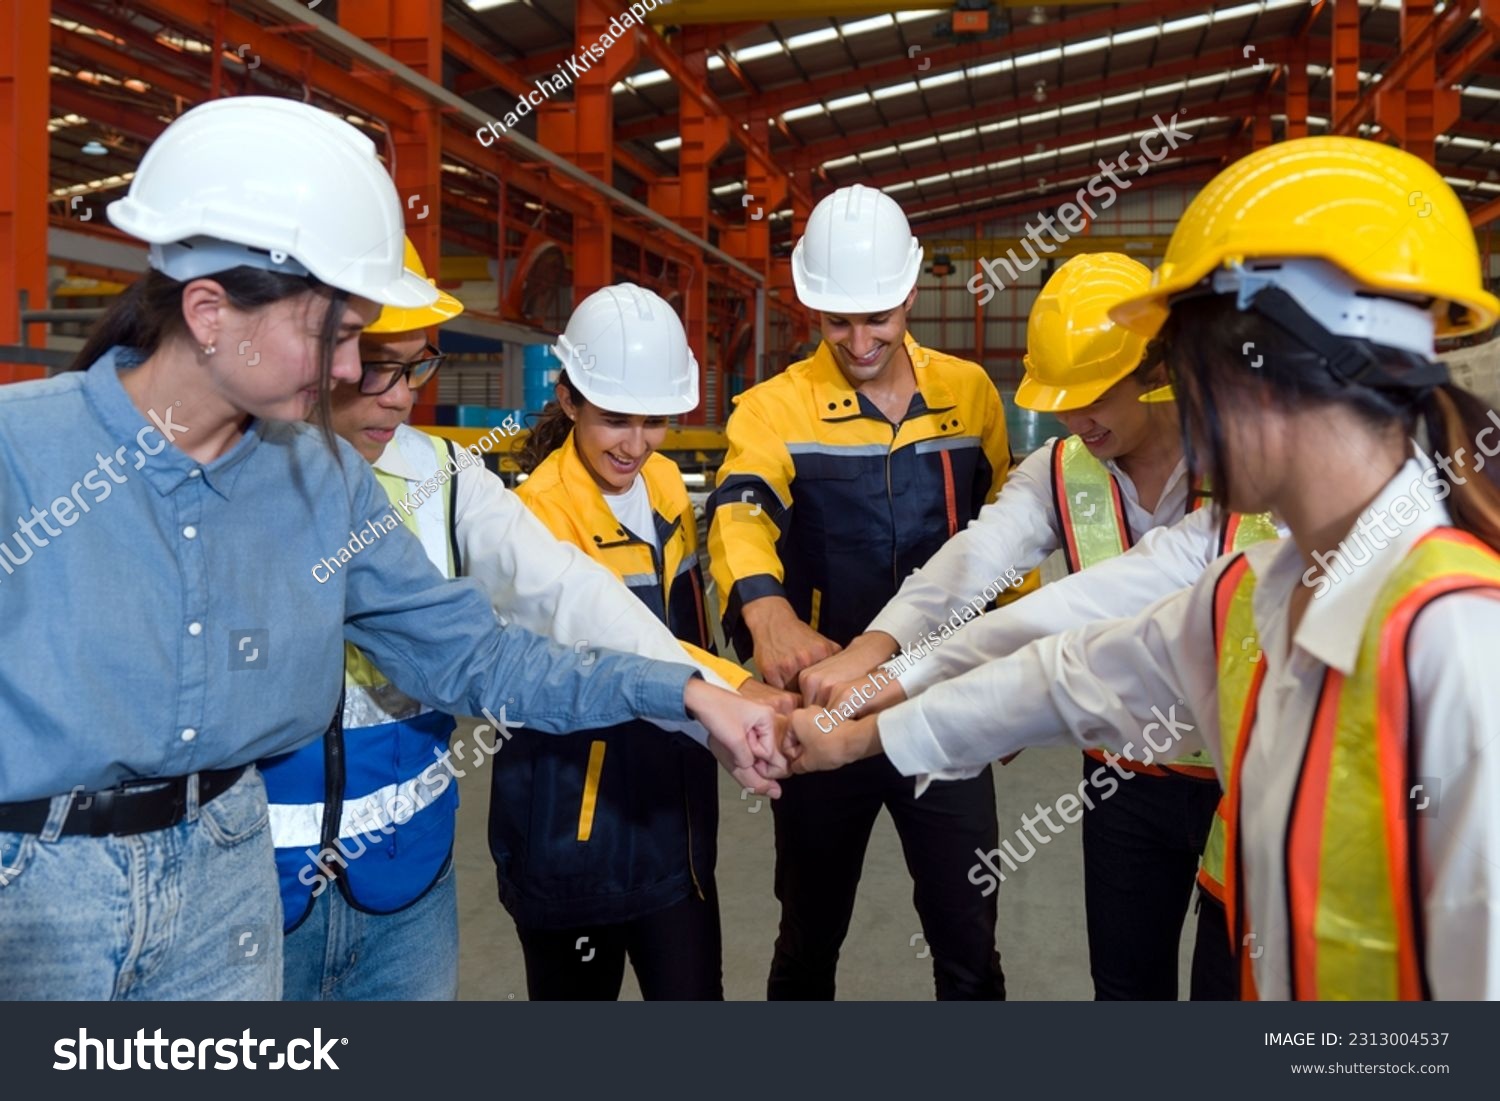 Group of male and female factory labor bumping fist together after finish meeting. Everyone wearing safety uniform and helmet. Workers working in the metal sheet factory. #2313004537